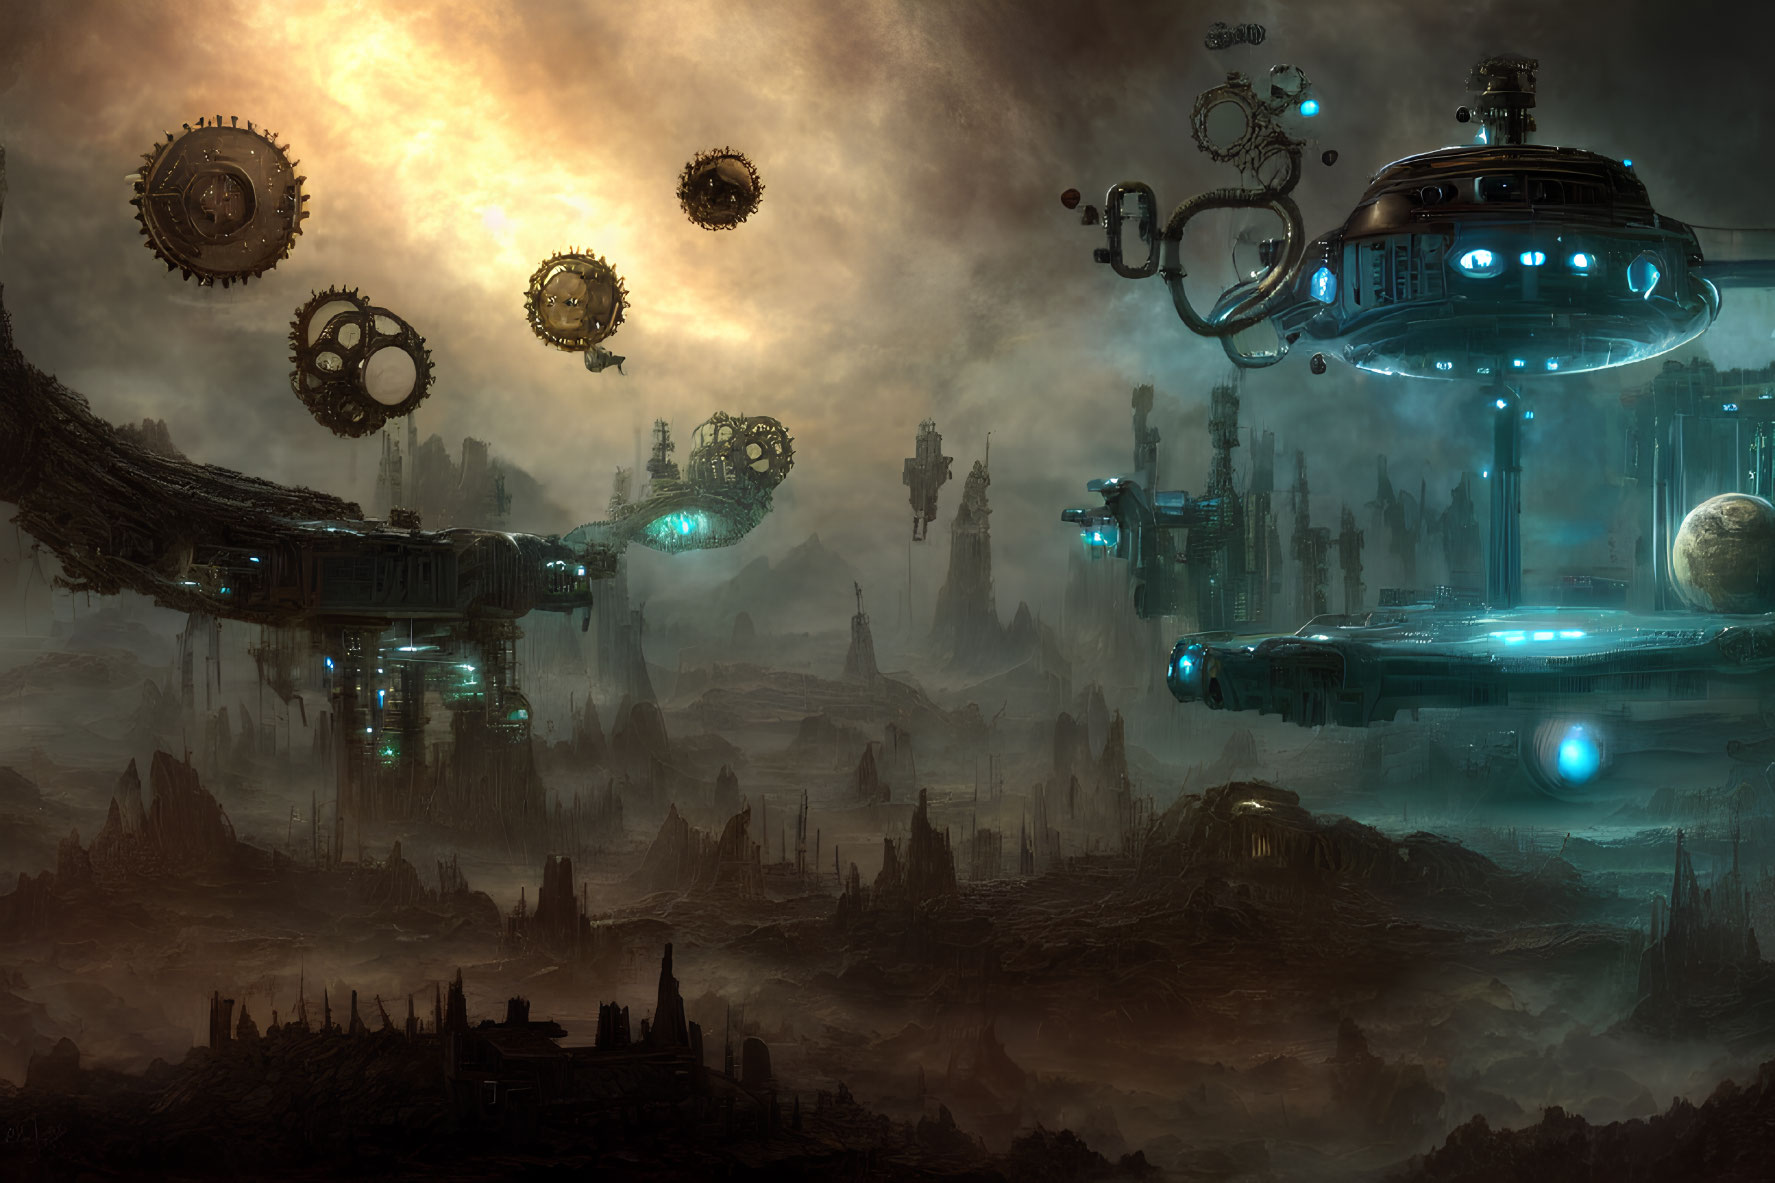 Dystopian steampunk landscape with floating gears and airships